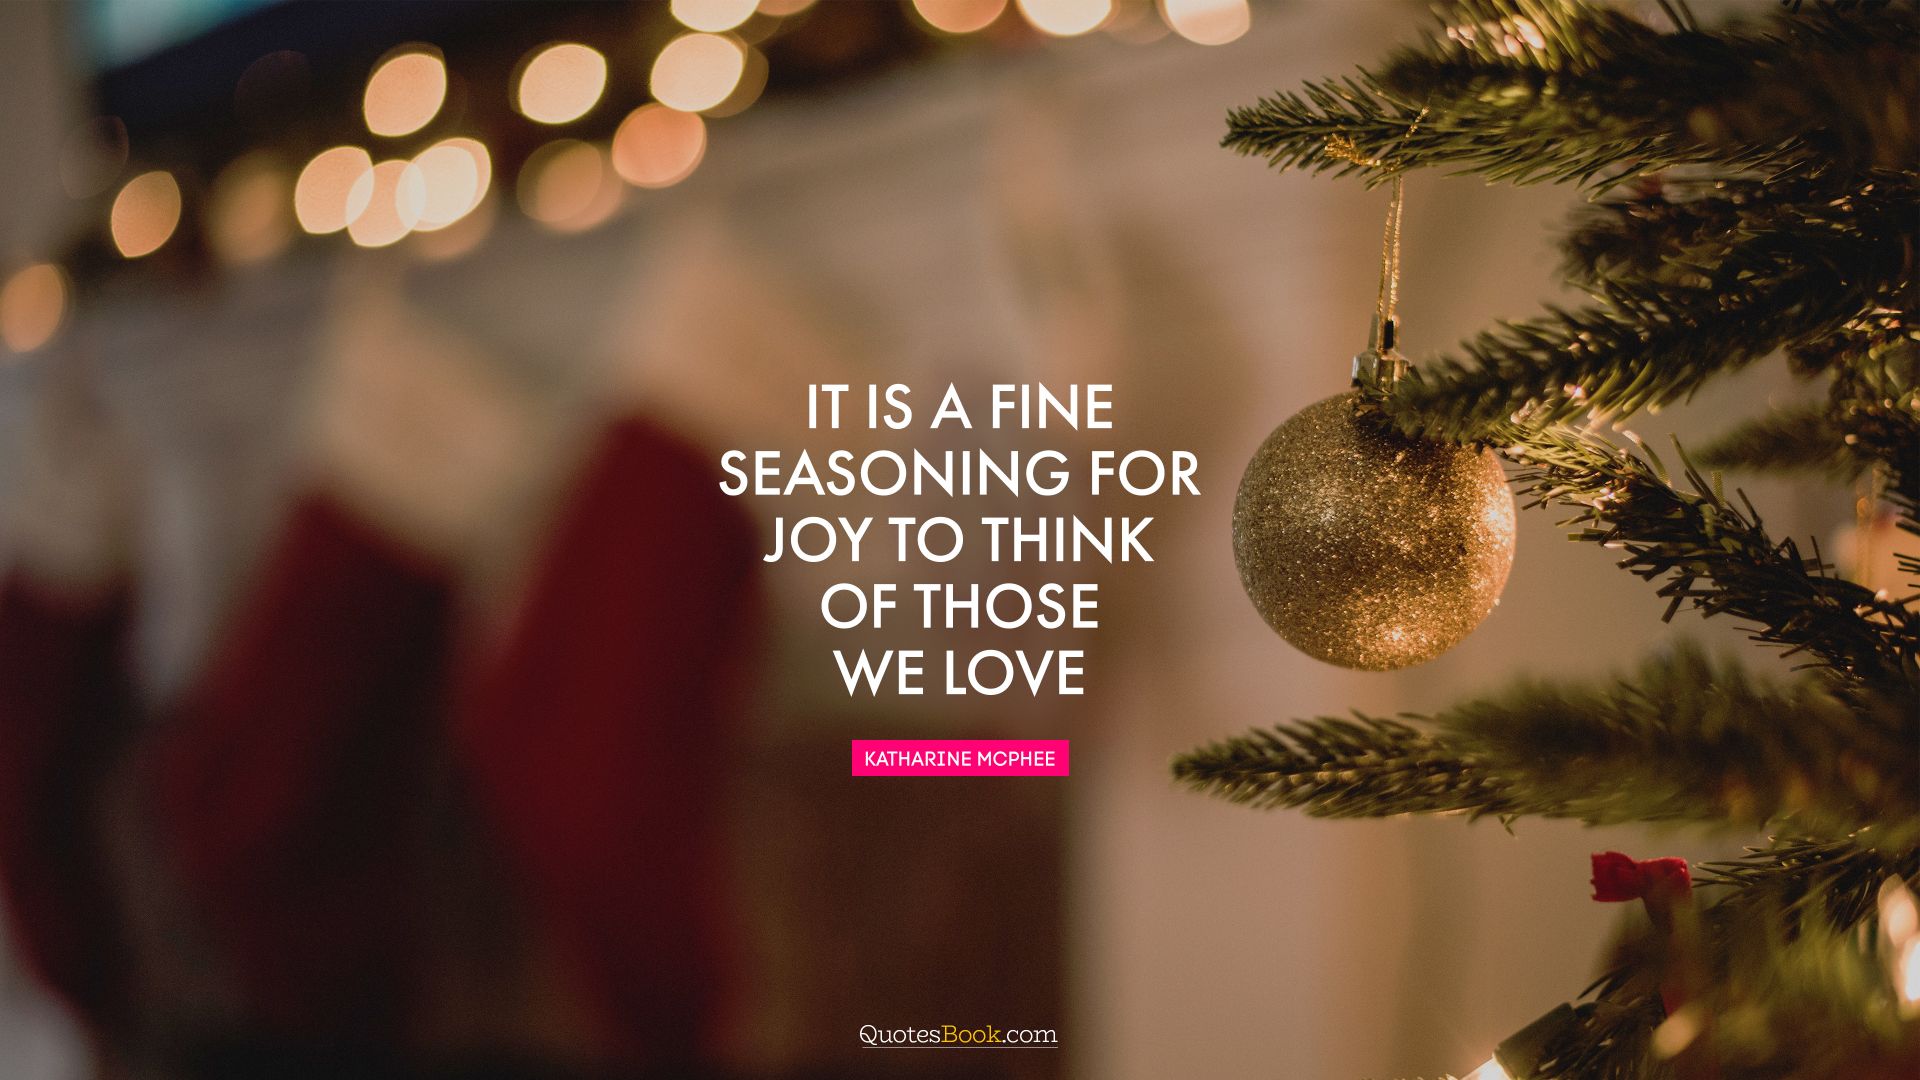 It is a fine seasoning for joy to think of those we love. - Quote by Moliere